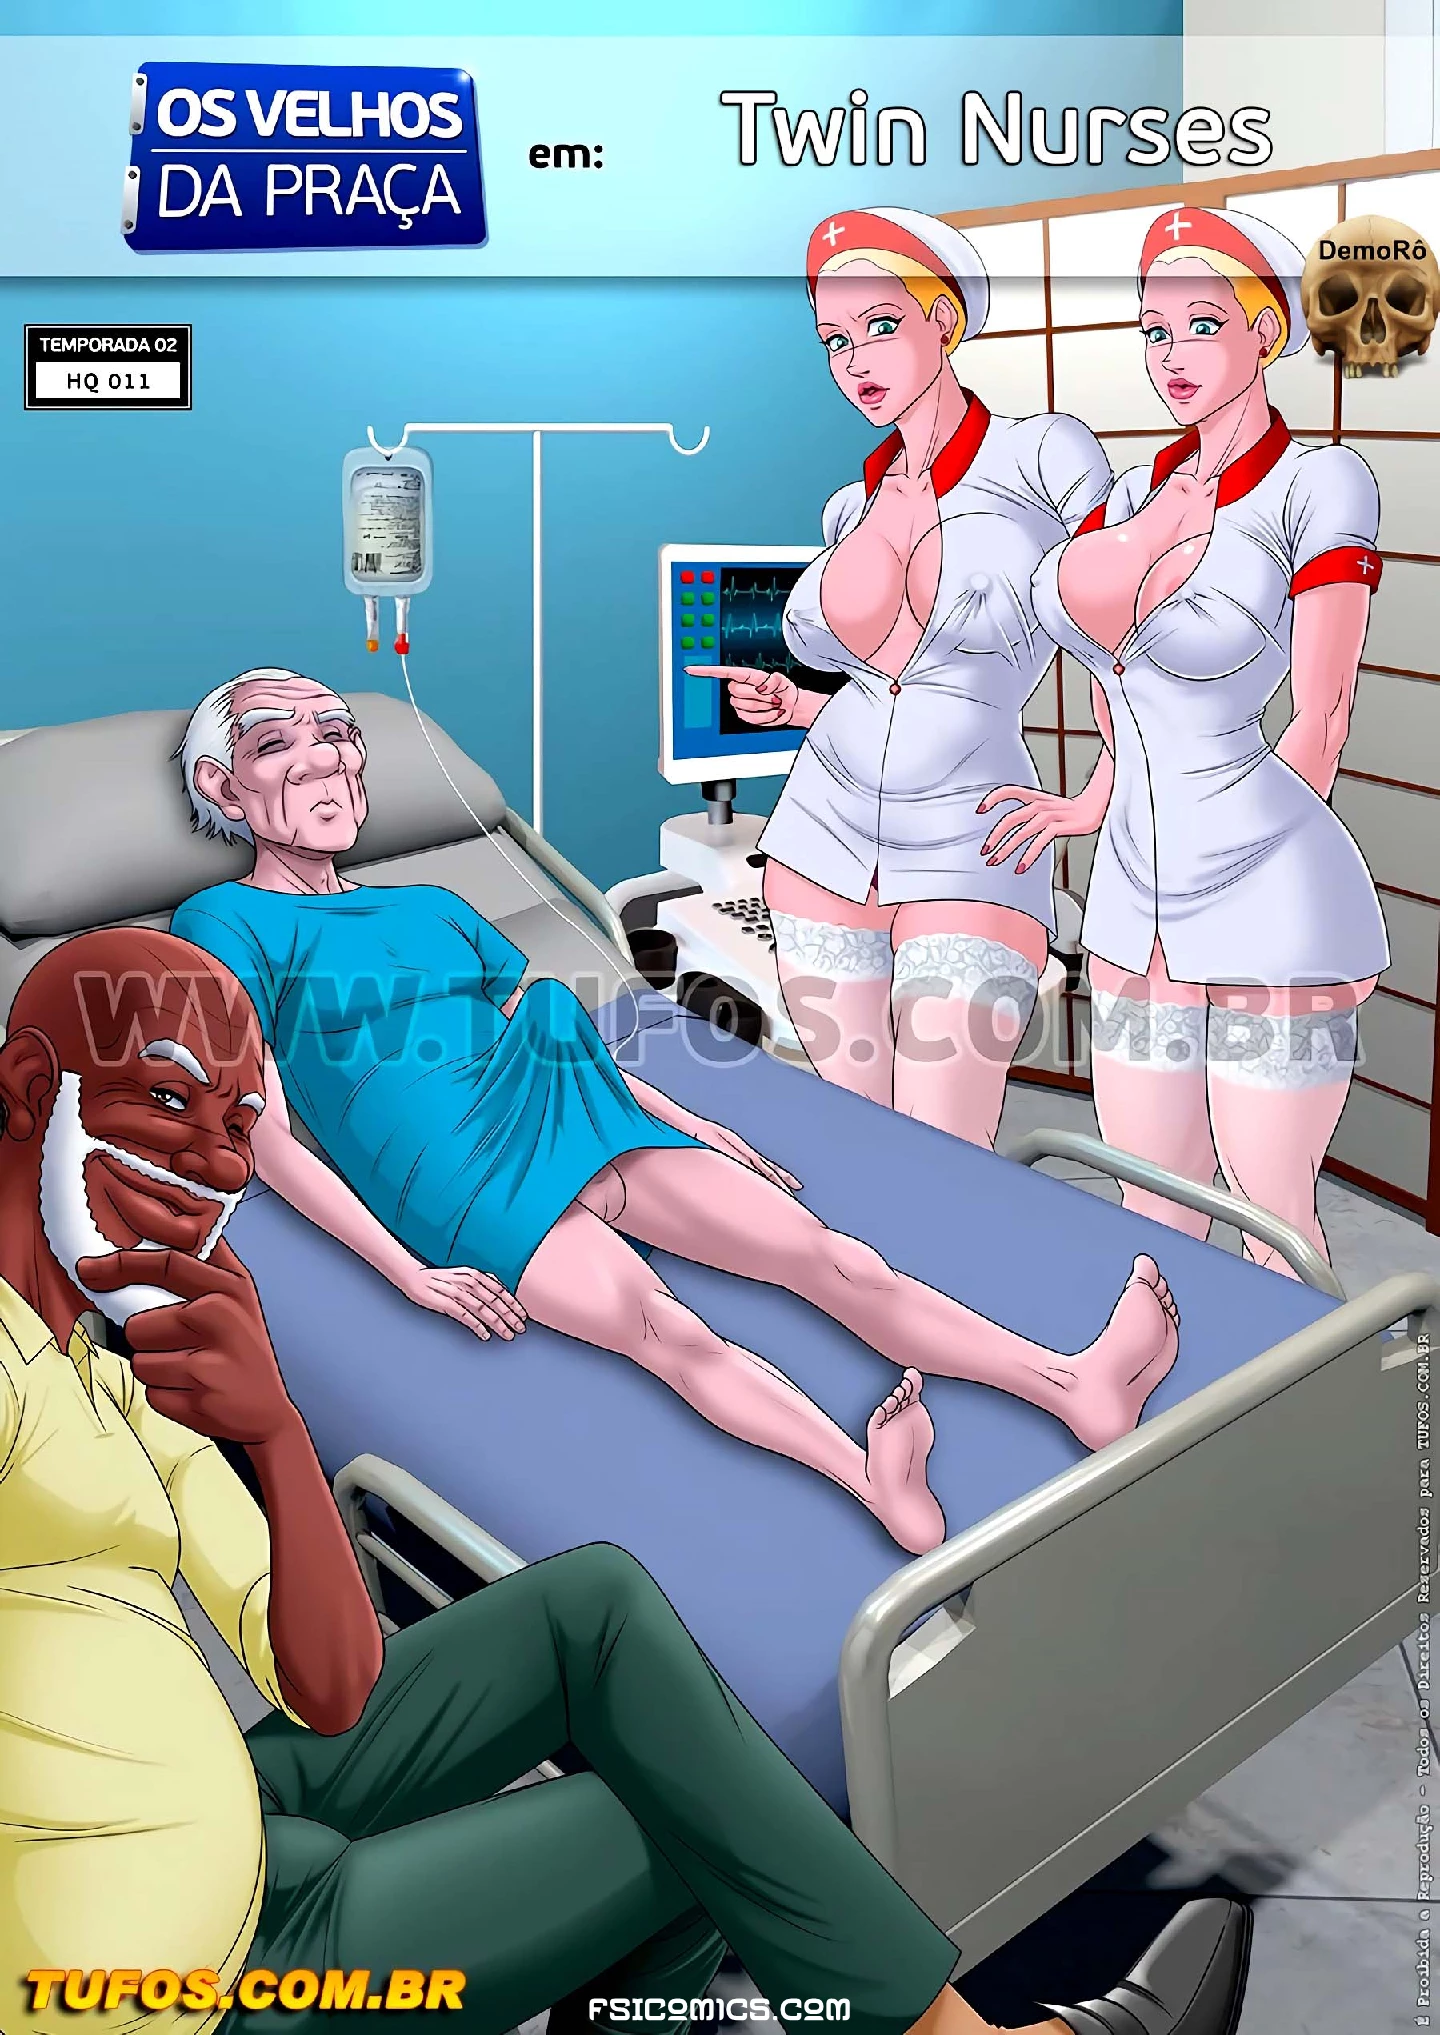 Old Geezers Of The Park Chapter 11 – Twin Nurses – Wc Tf - 61 - Fsicomics